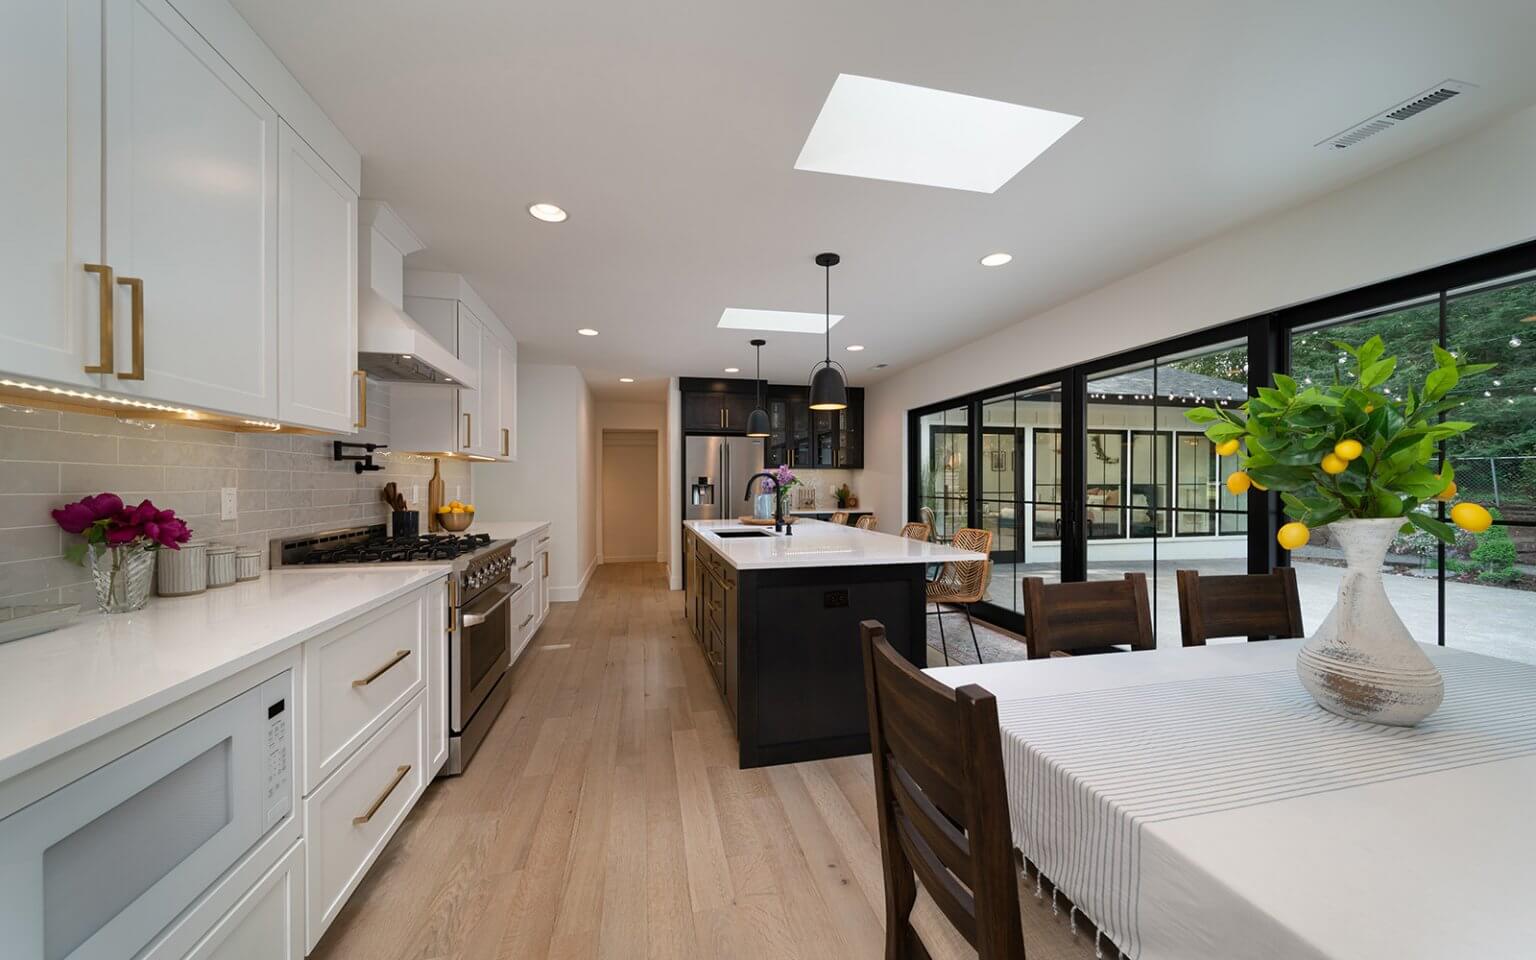 Kitchen Fully Customs Remodeling Cost in Portland, Or - Woodland Construction Group